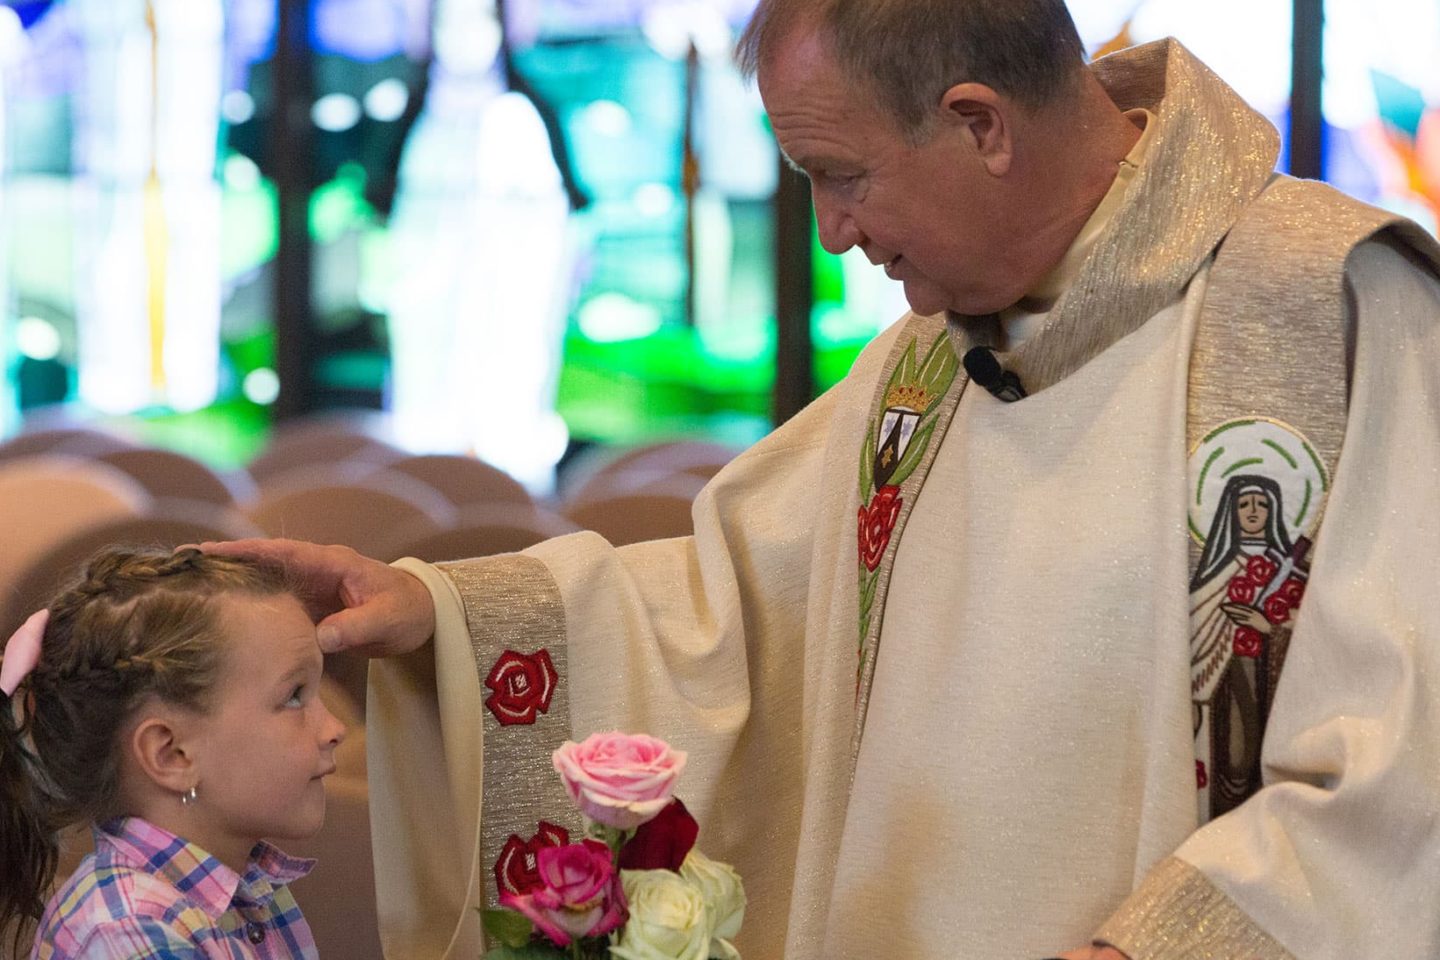 Fr. Bob Colaresi blesses young child at St. Therese Feast Day